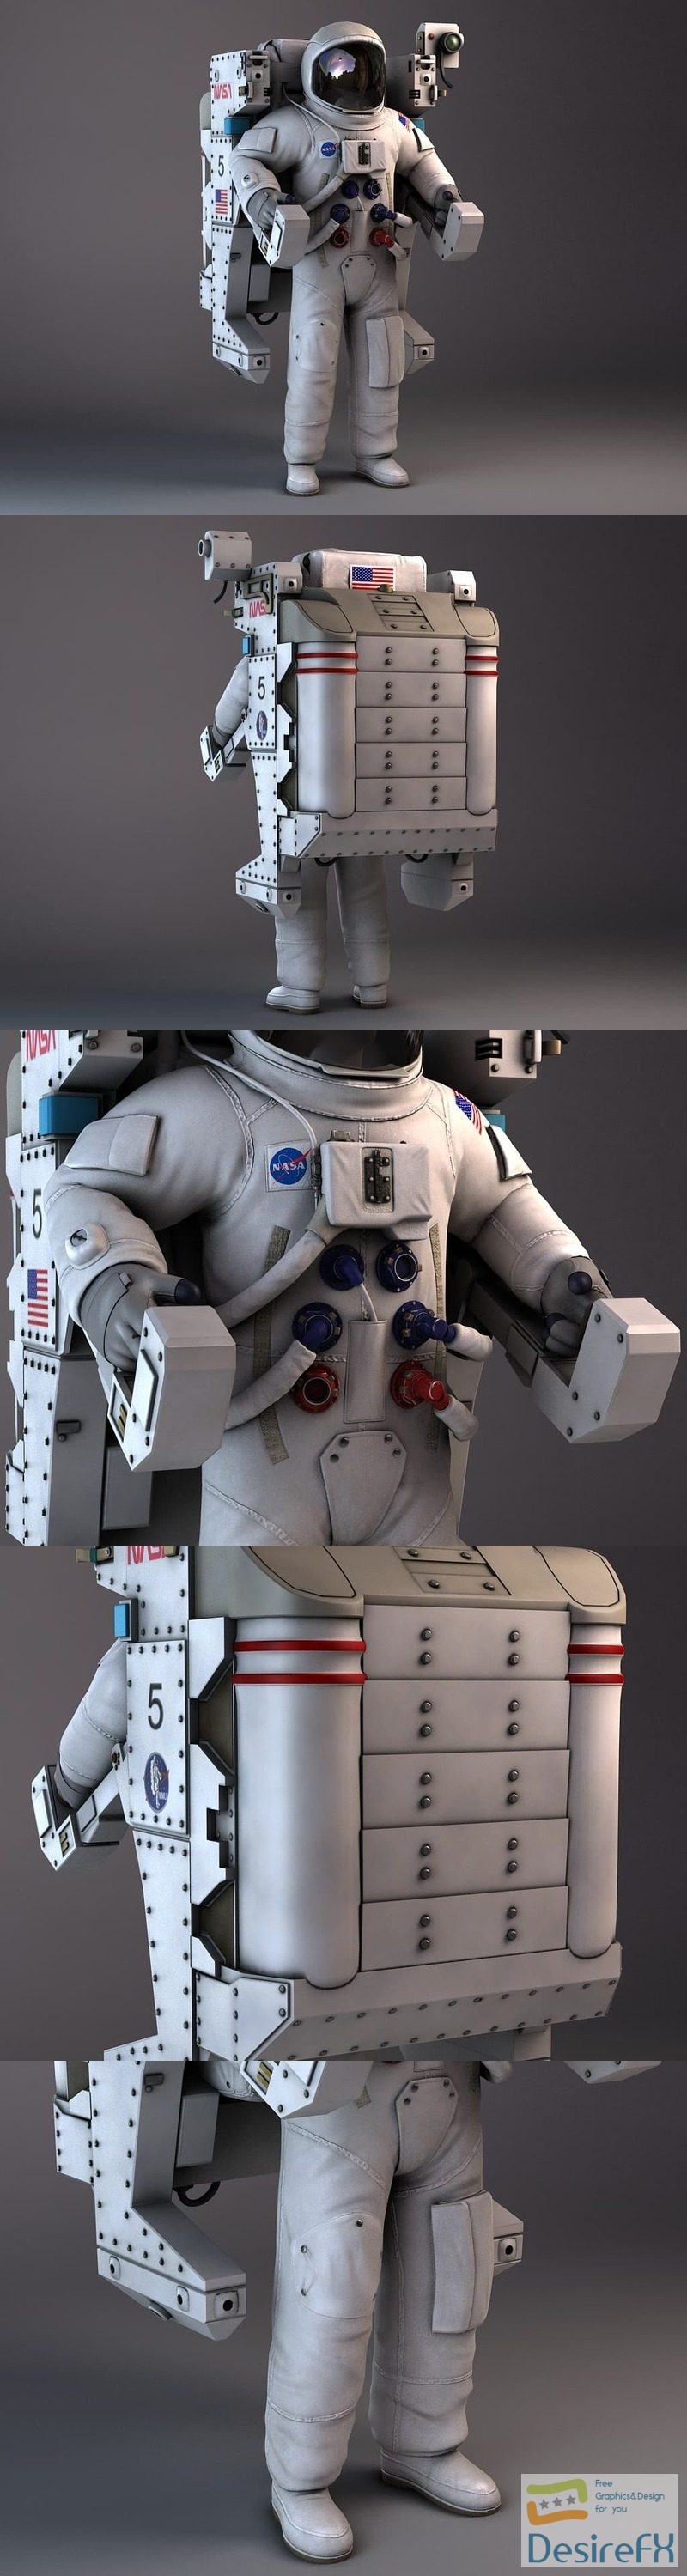 NASA MMU Backpack With Astronaut 3D Model